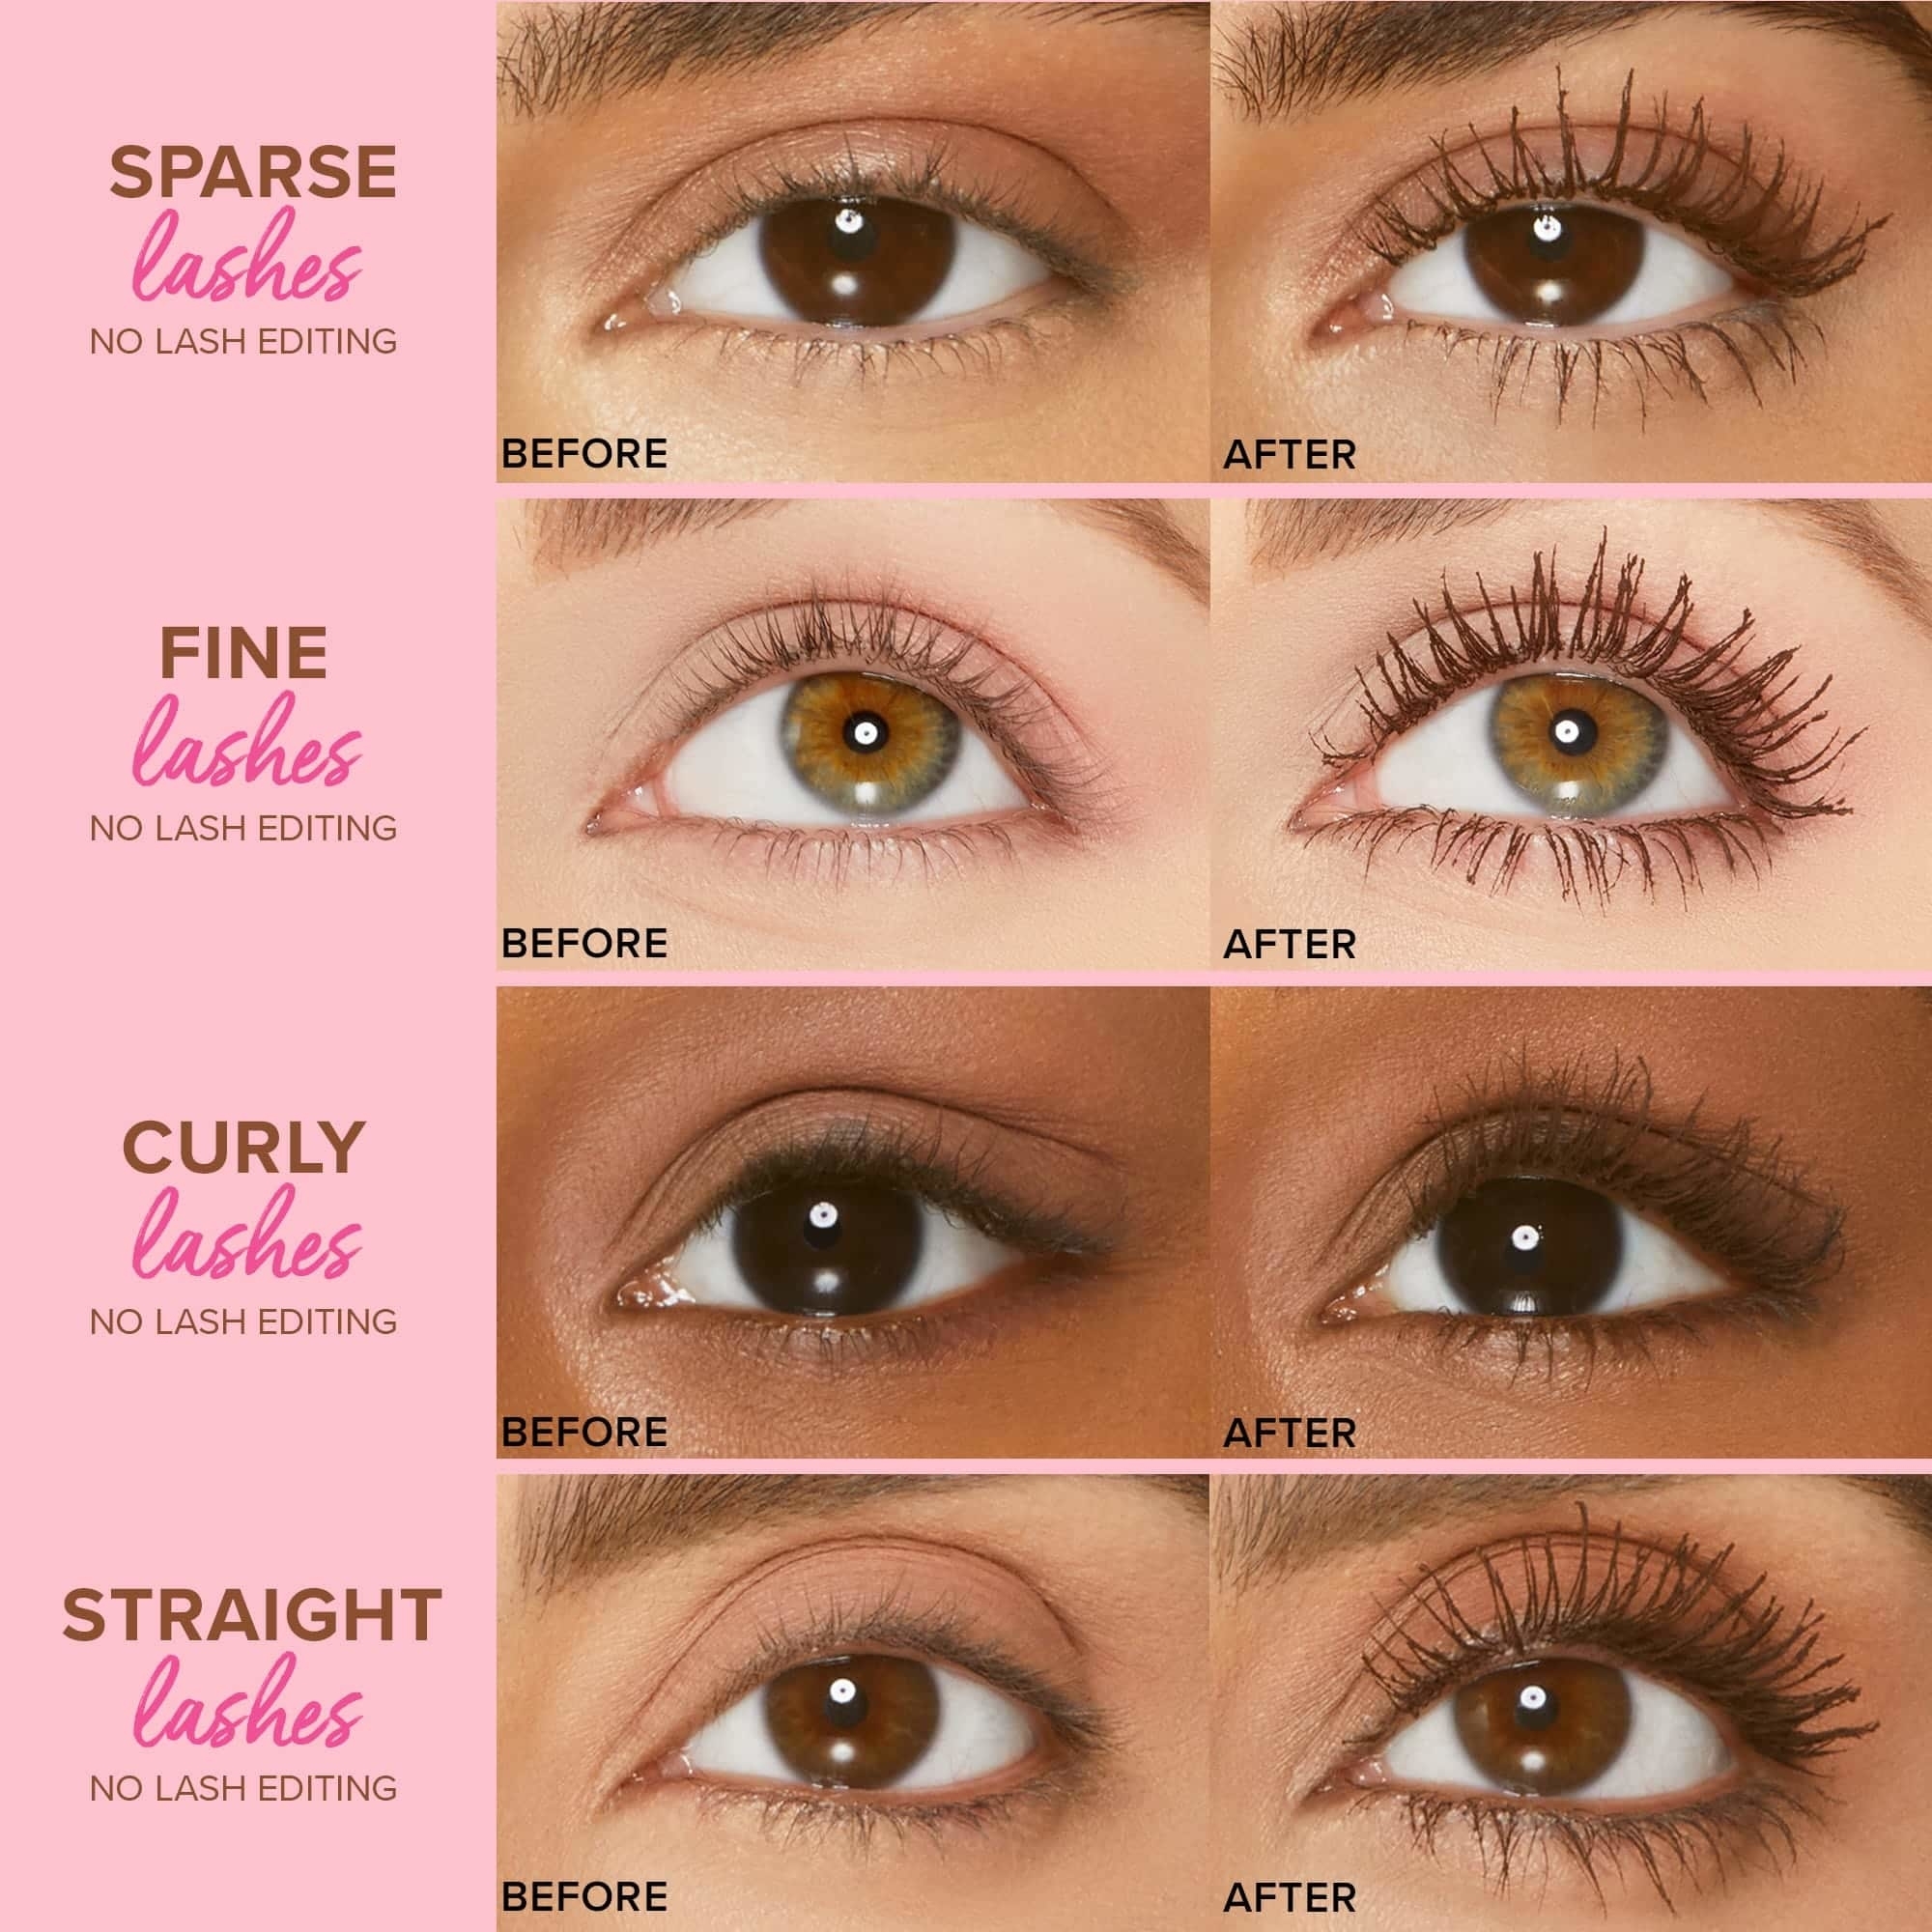 before and after pics showing how mascara works